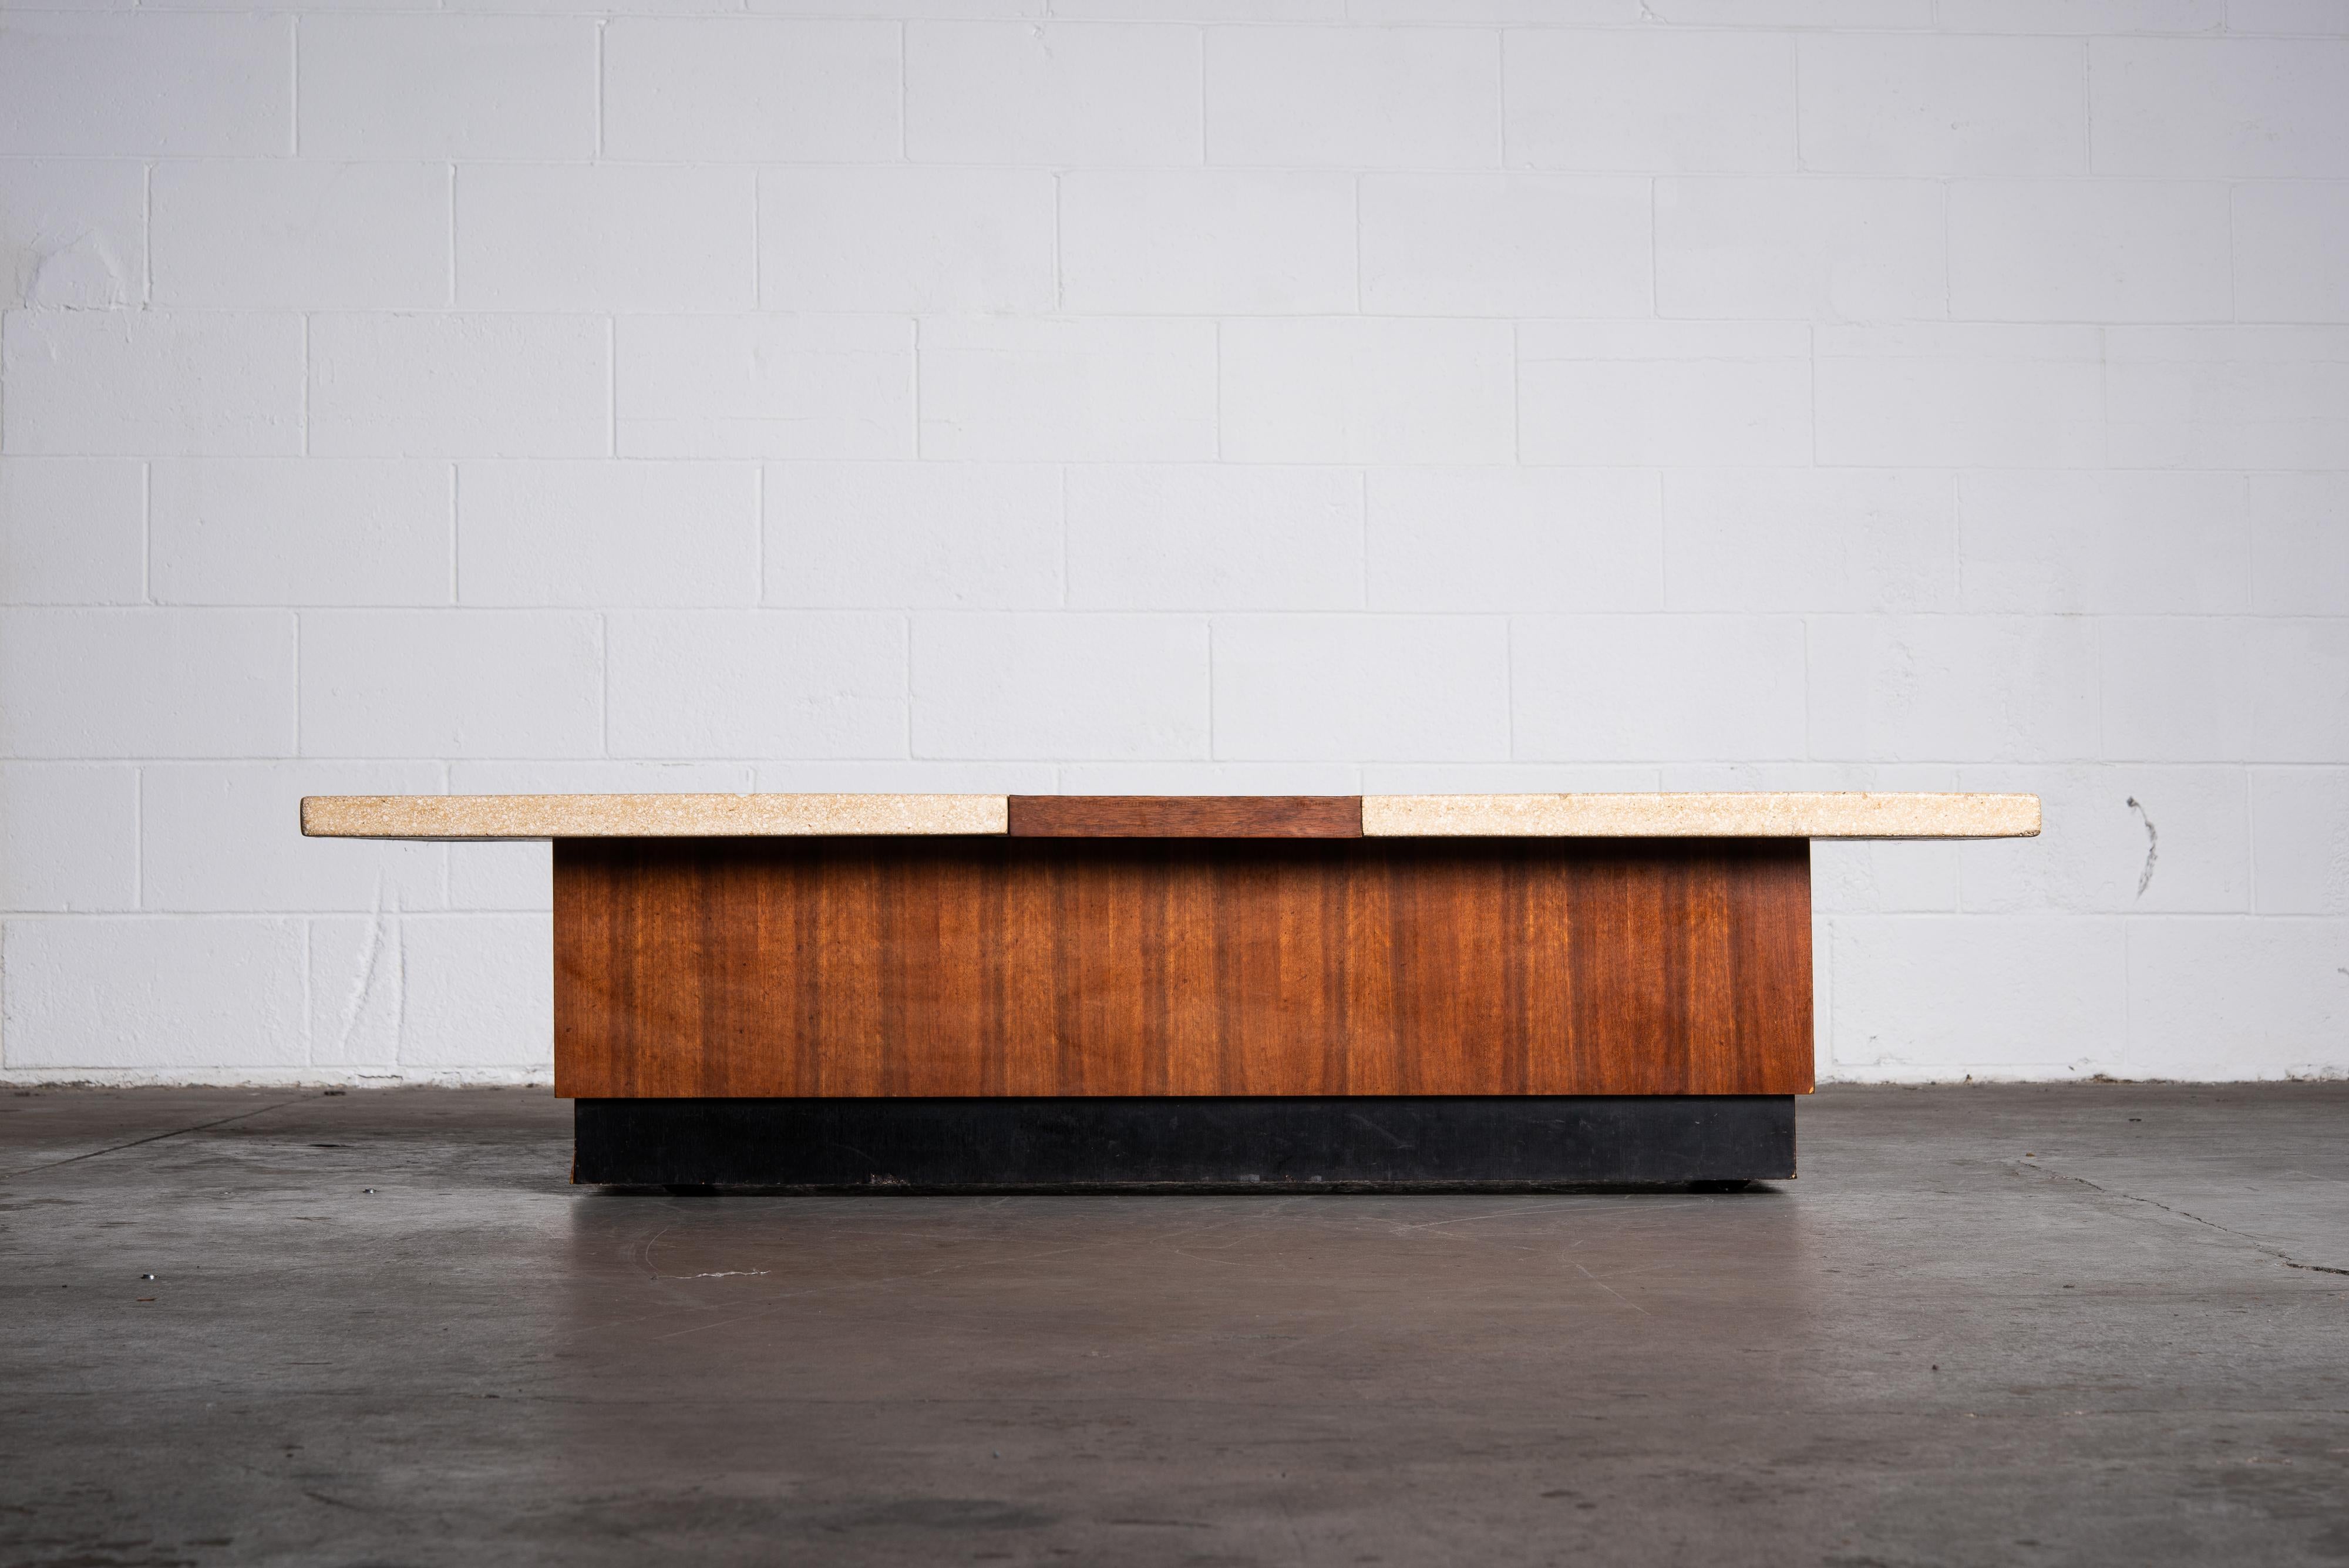 A stylish Mid-Century Modern Terrazzo and Walnut coffee table or bench in the style of Harvey Probber, featuring two terrazzo stone tops with a walnut section in between, on top of a walnut and ebonized plinth base with hidden casters to make it